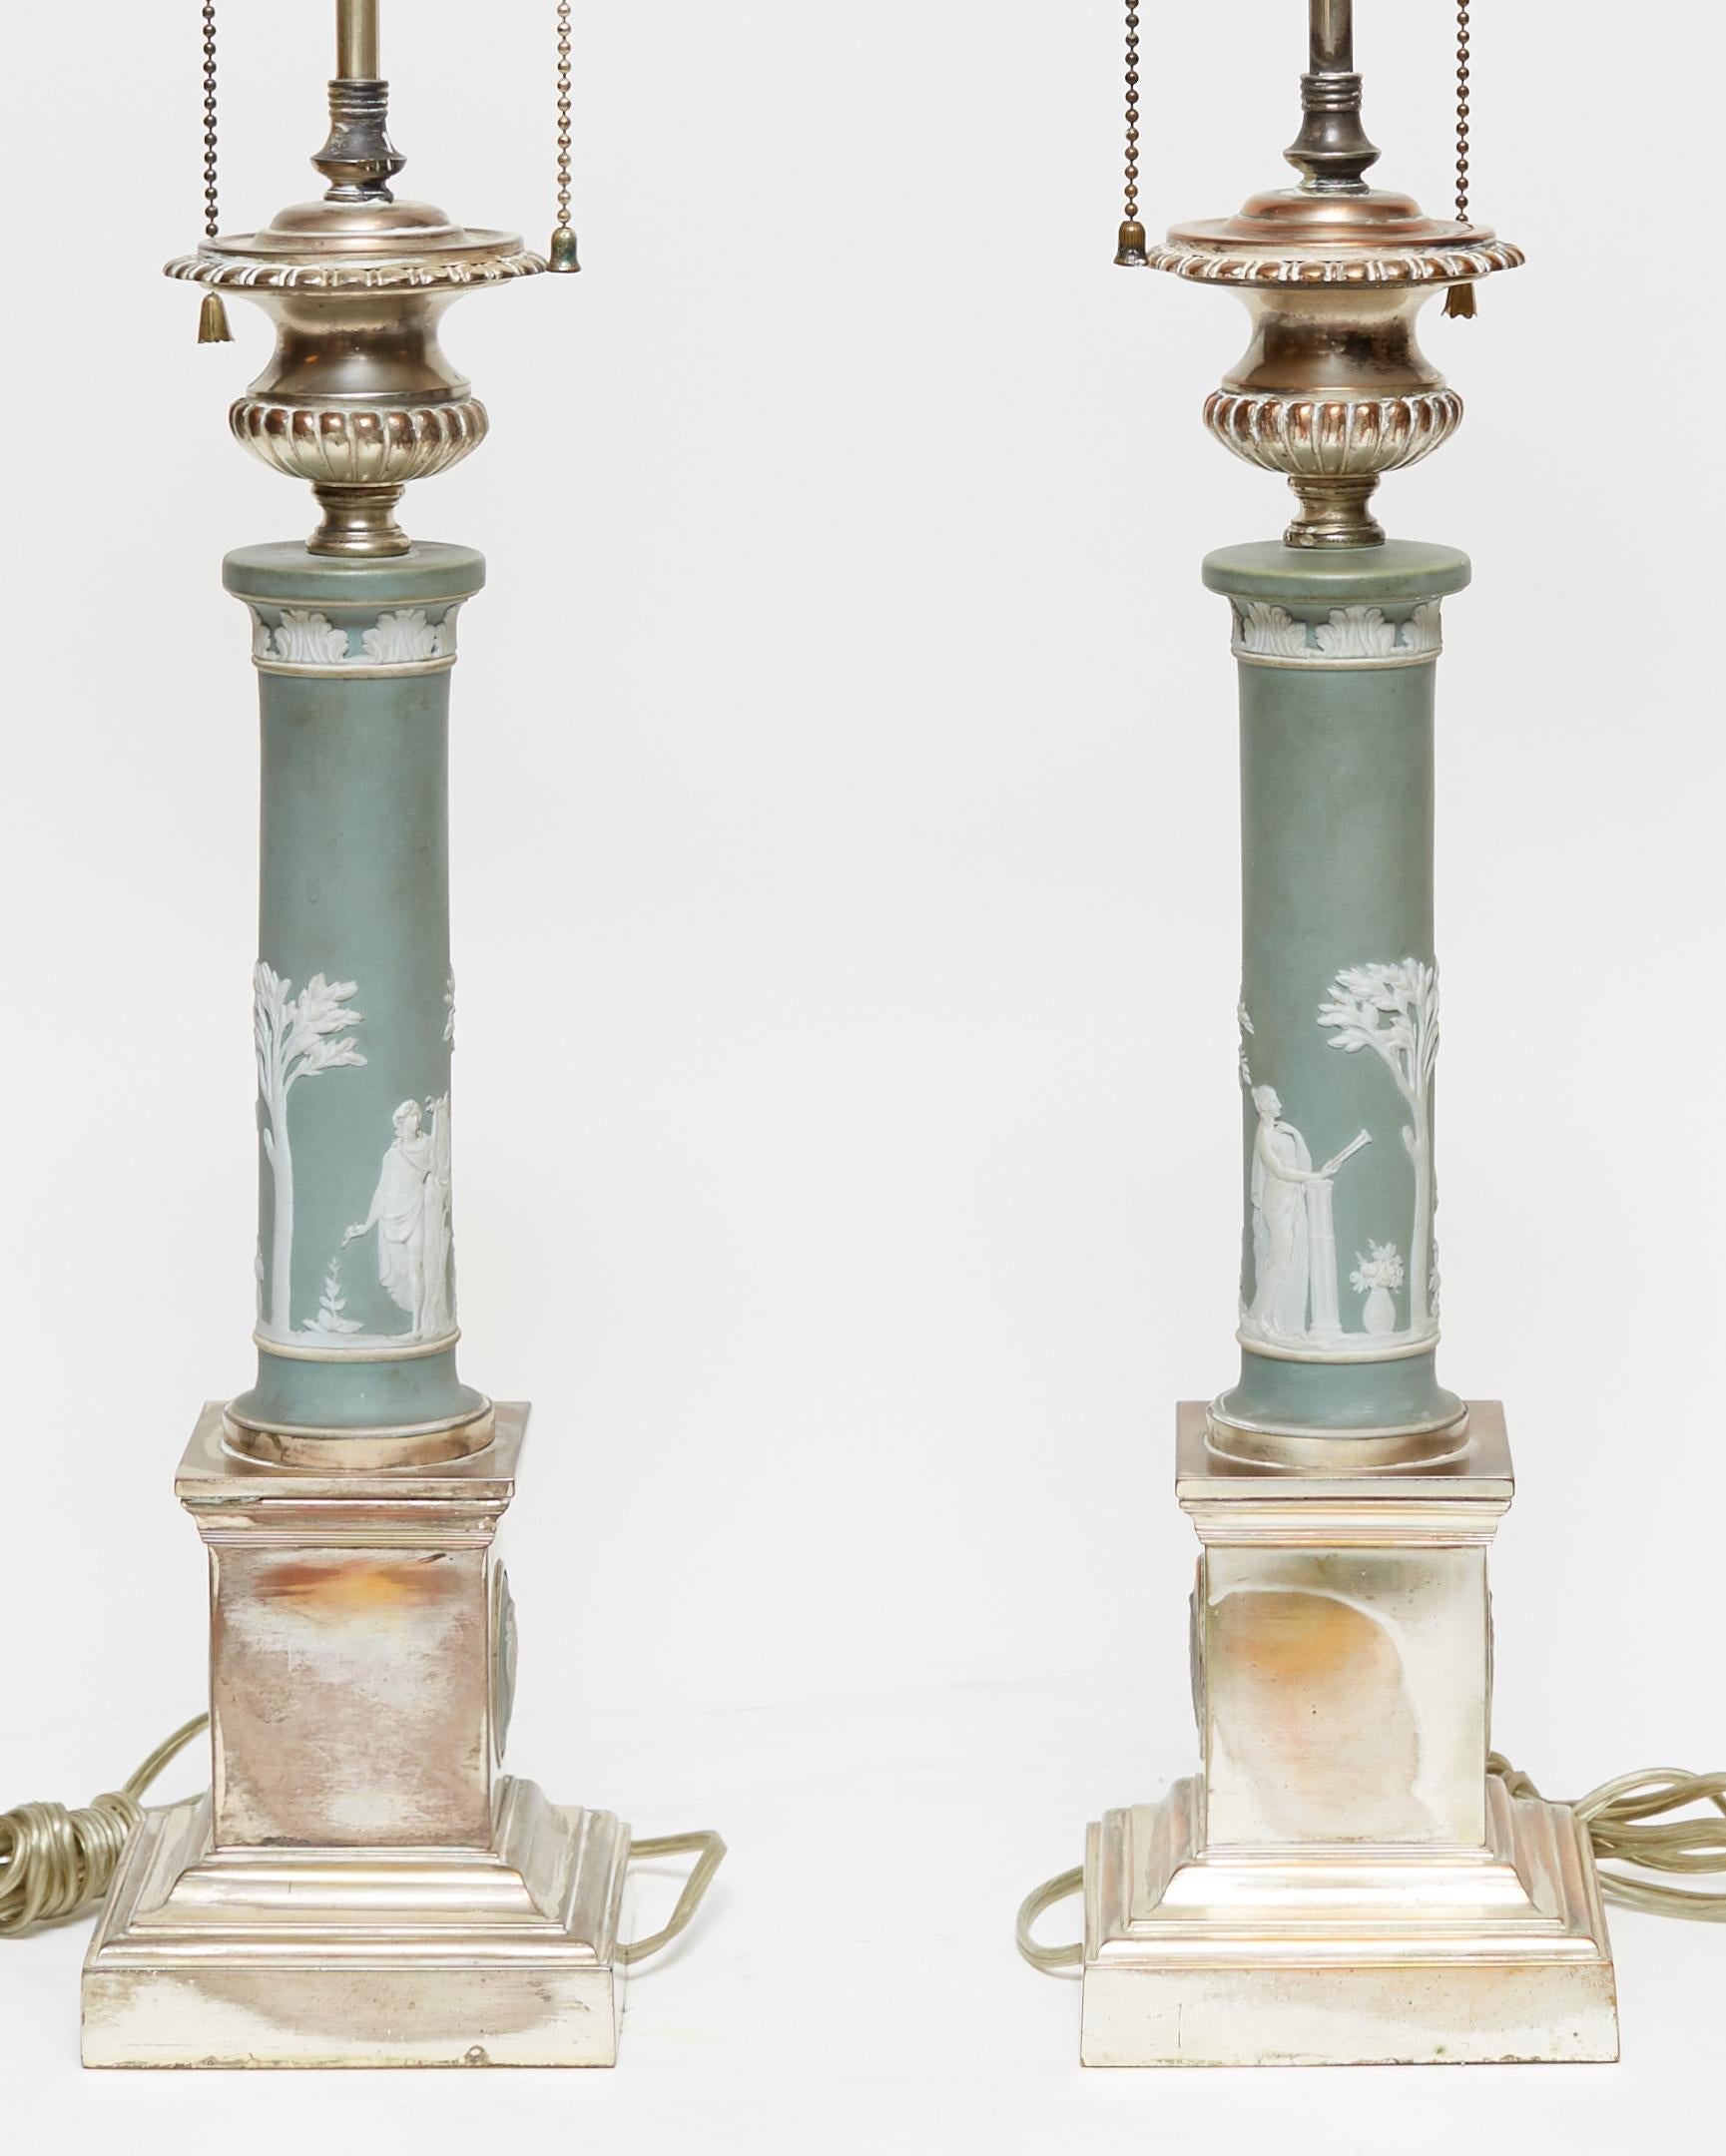 Pair of table lamps in the neoclassical style, with standards of Jasperware porcelain in Roman column form, with square silver gilded bases with classical Jasperware medallions. Possibly from Wedgwood.